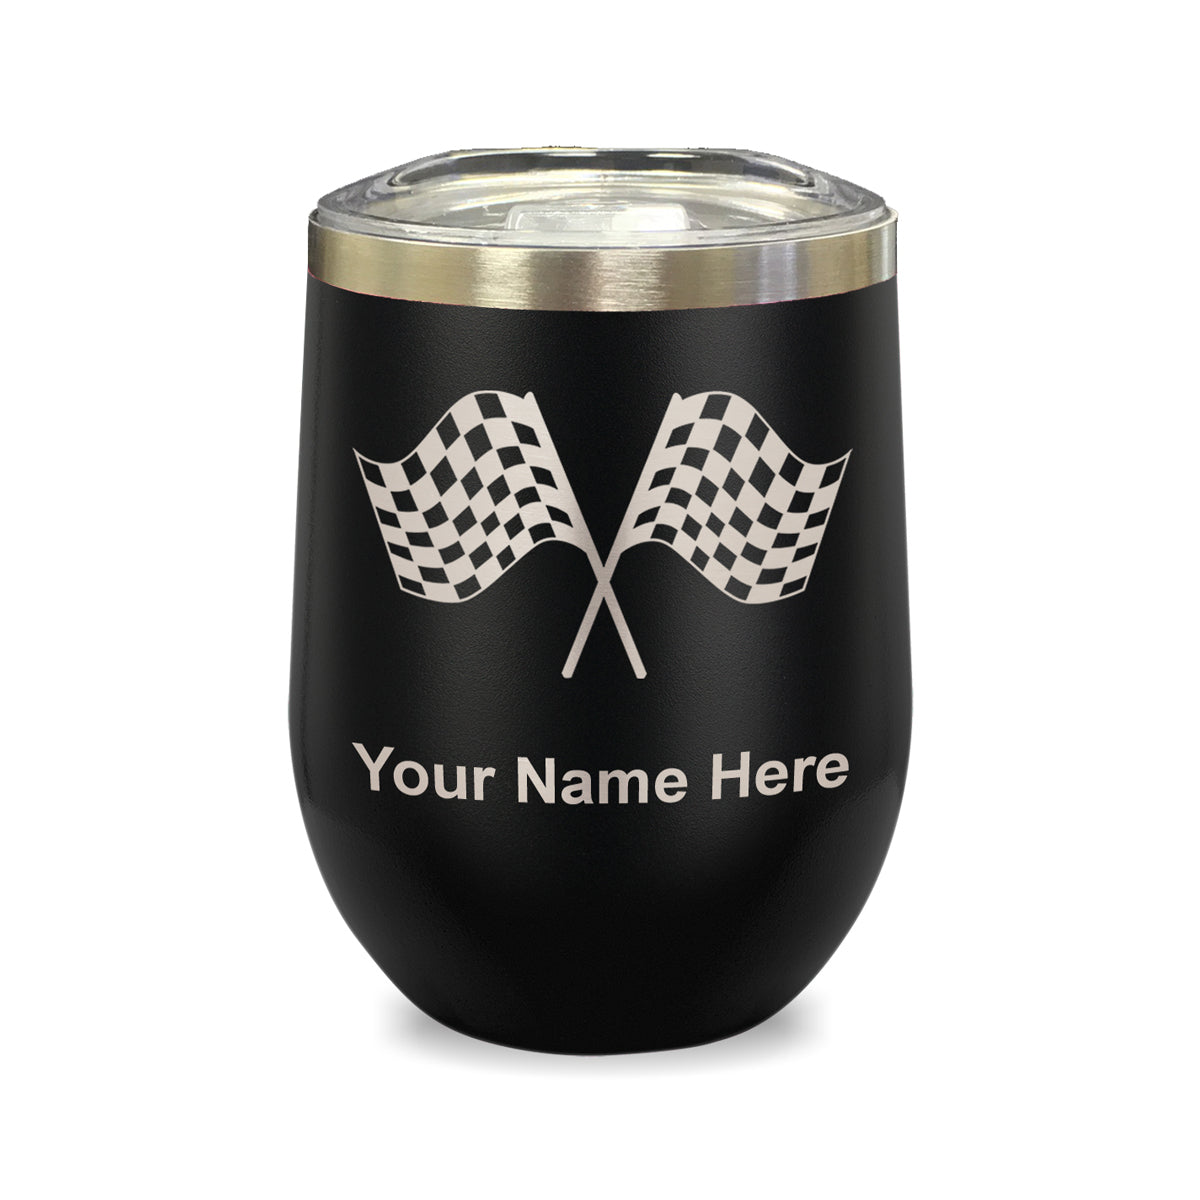 LaserGram Double Wall Stainless Steel Wine Glass, Racing Flags, Personalized Engraving Included